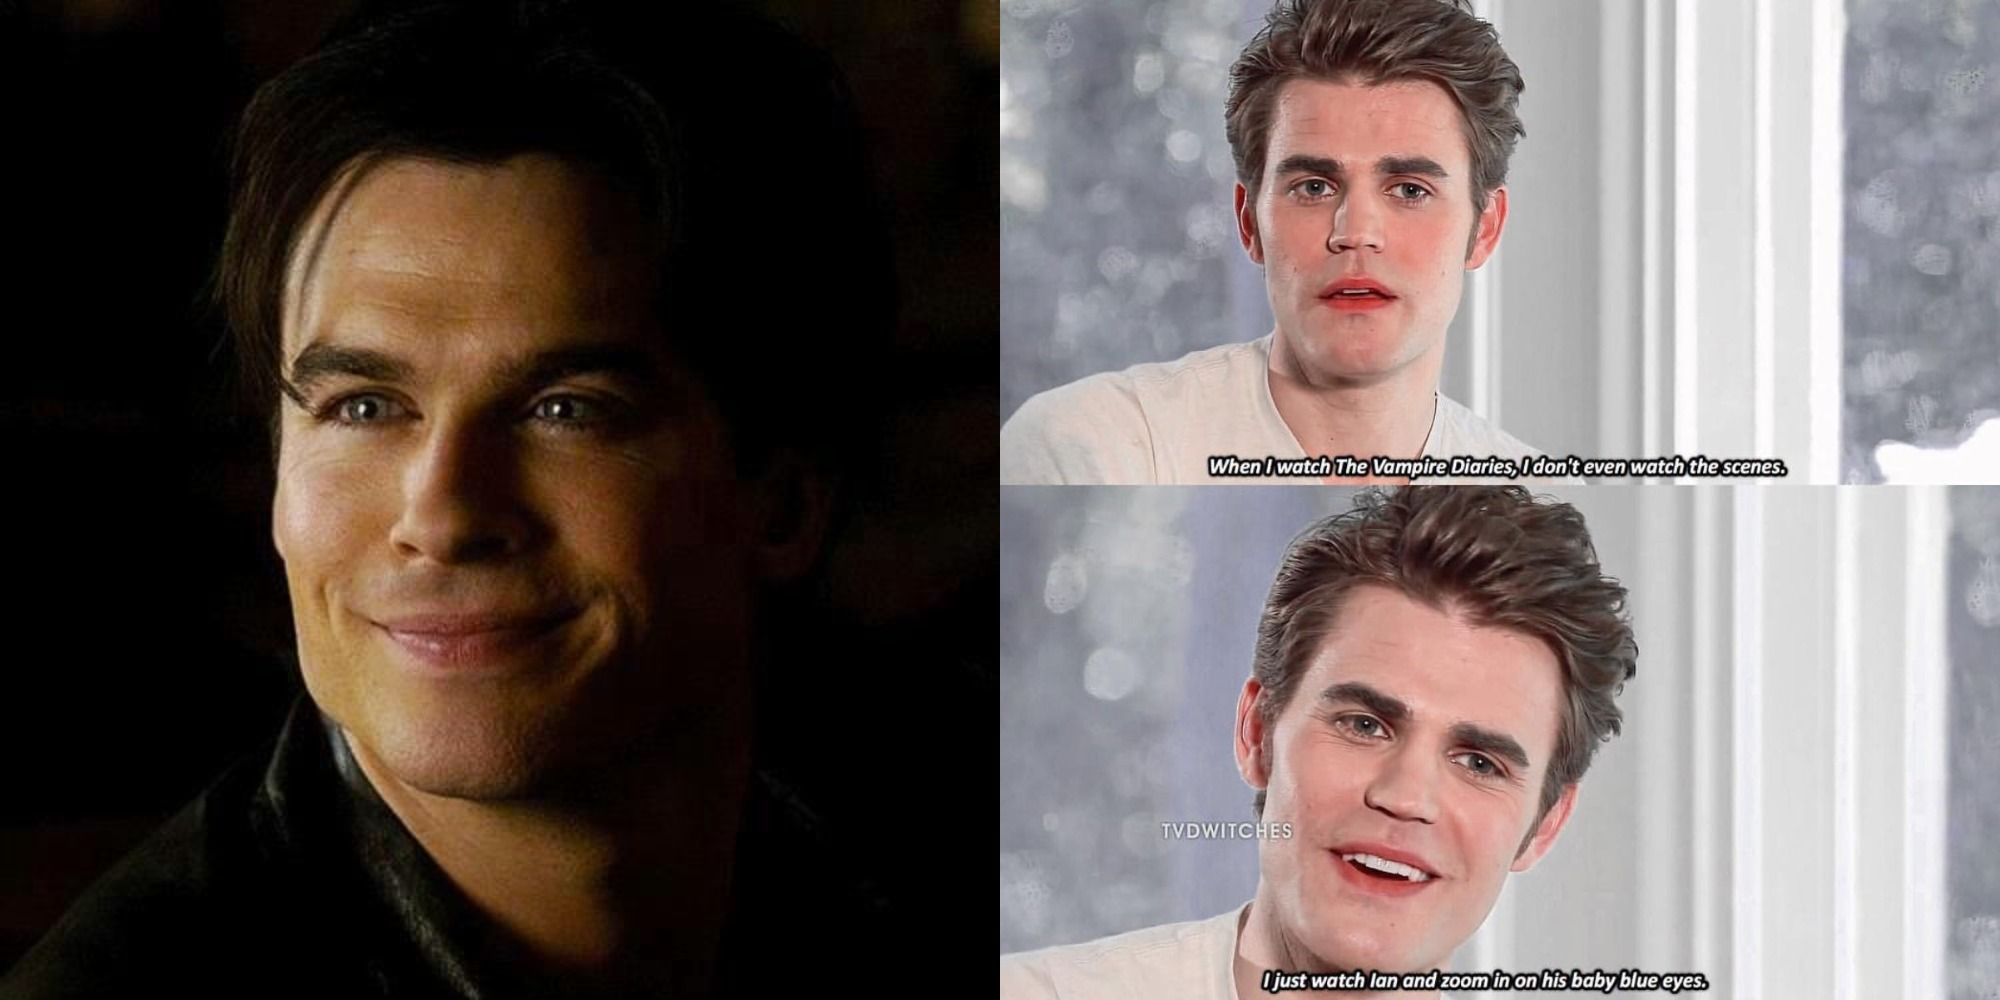 Split image showing Damon Salvatore smiling and a meme featuring Paul Wesley